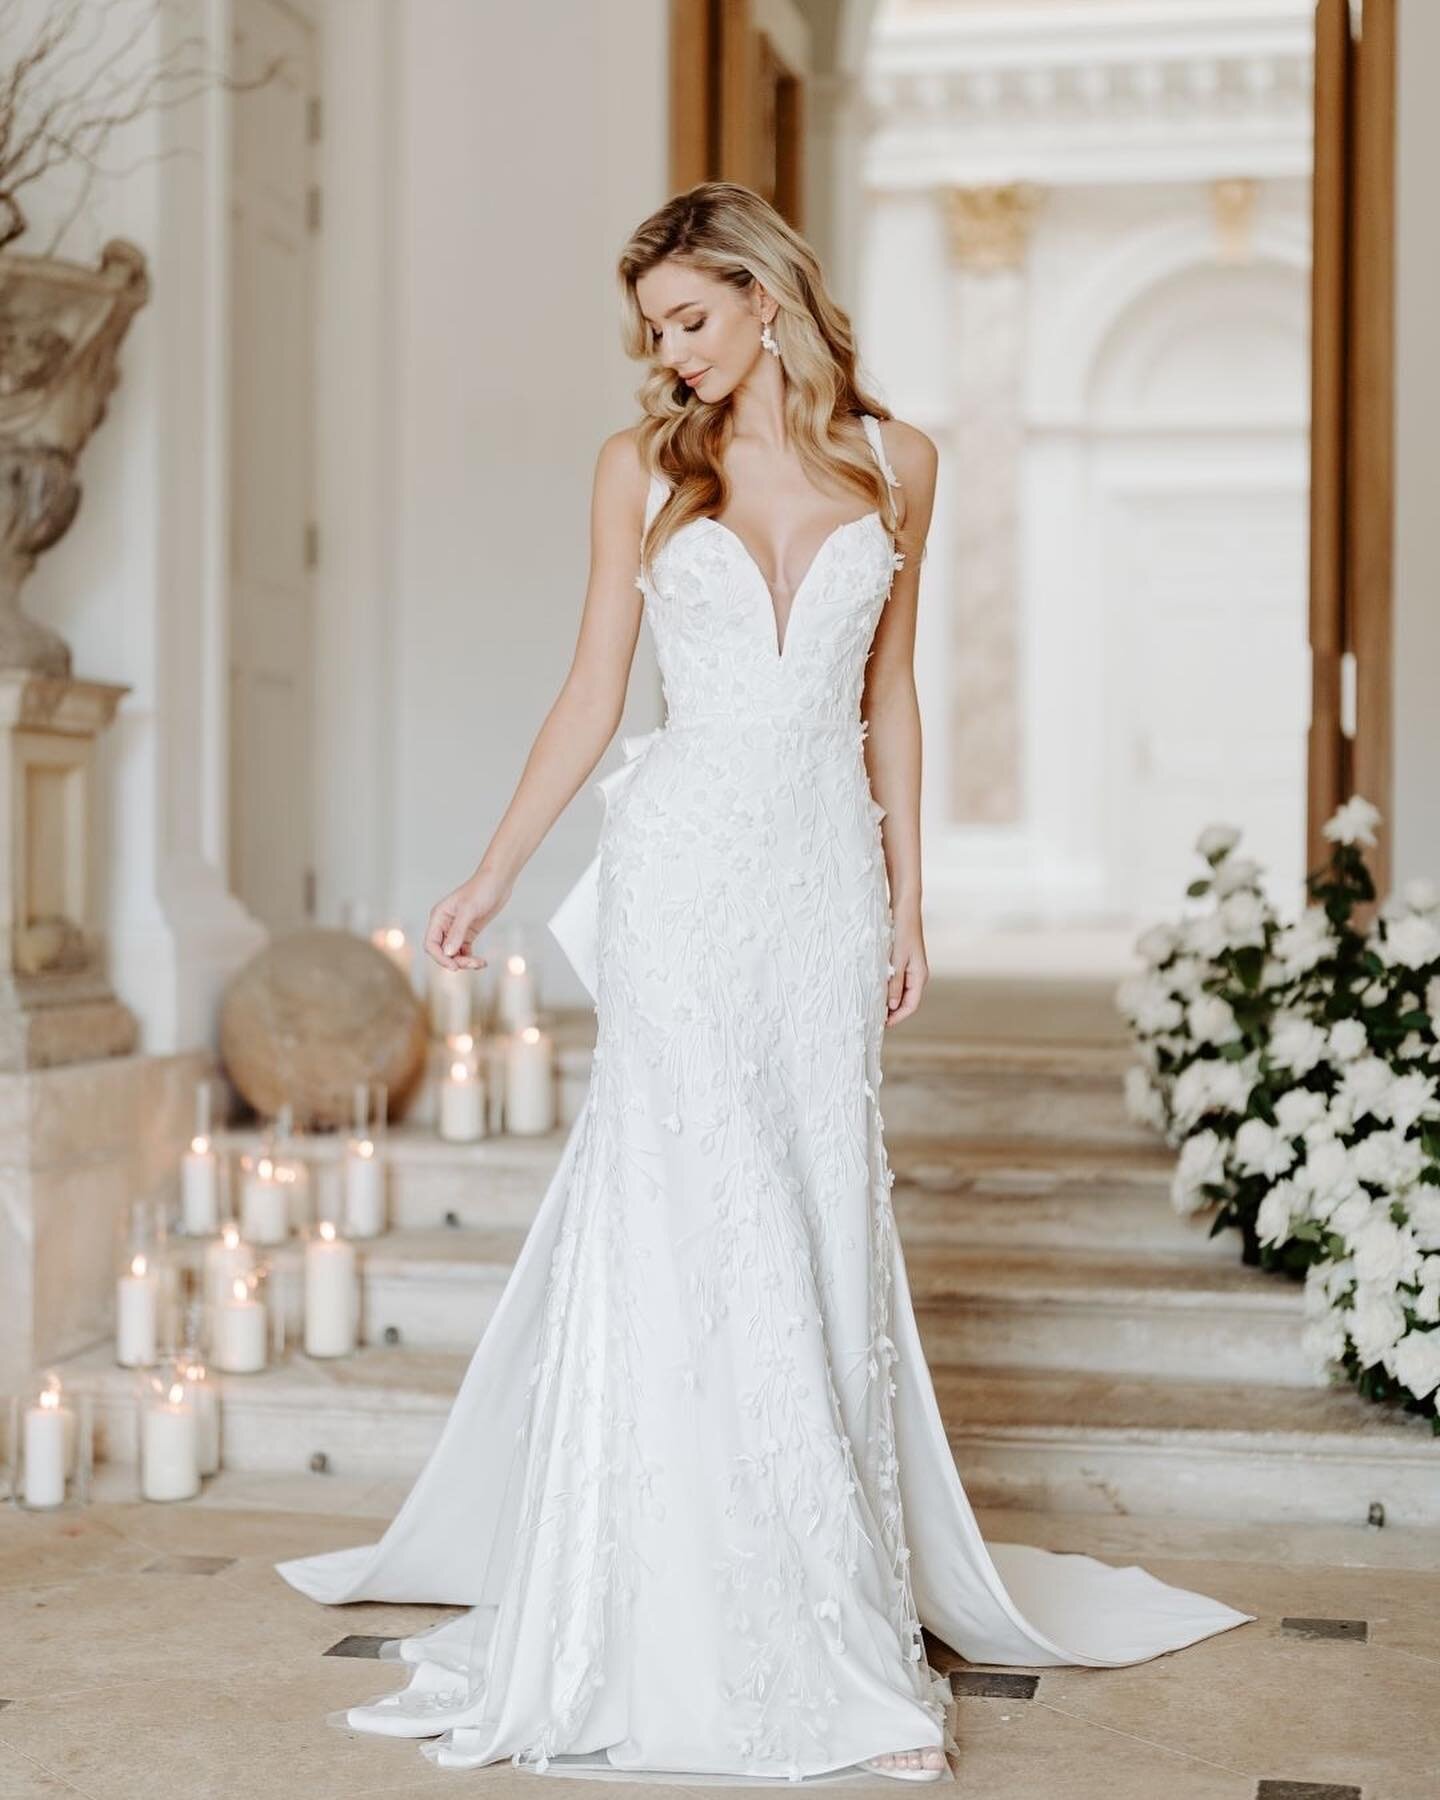 Suzanne Neville 2023 Collection Pellicano gown and train now available  for purchase! 

Enquire now at the link in bio 🤍

#suzanneneville